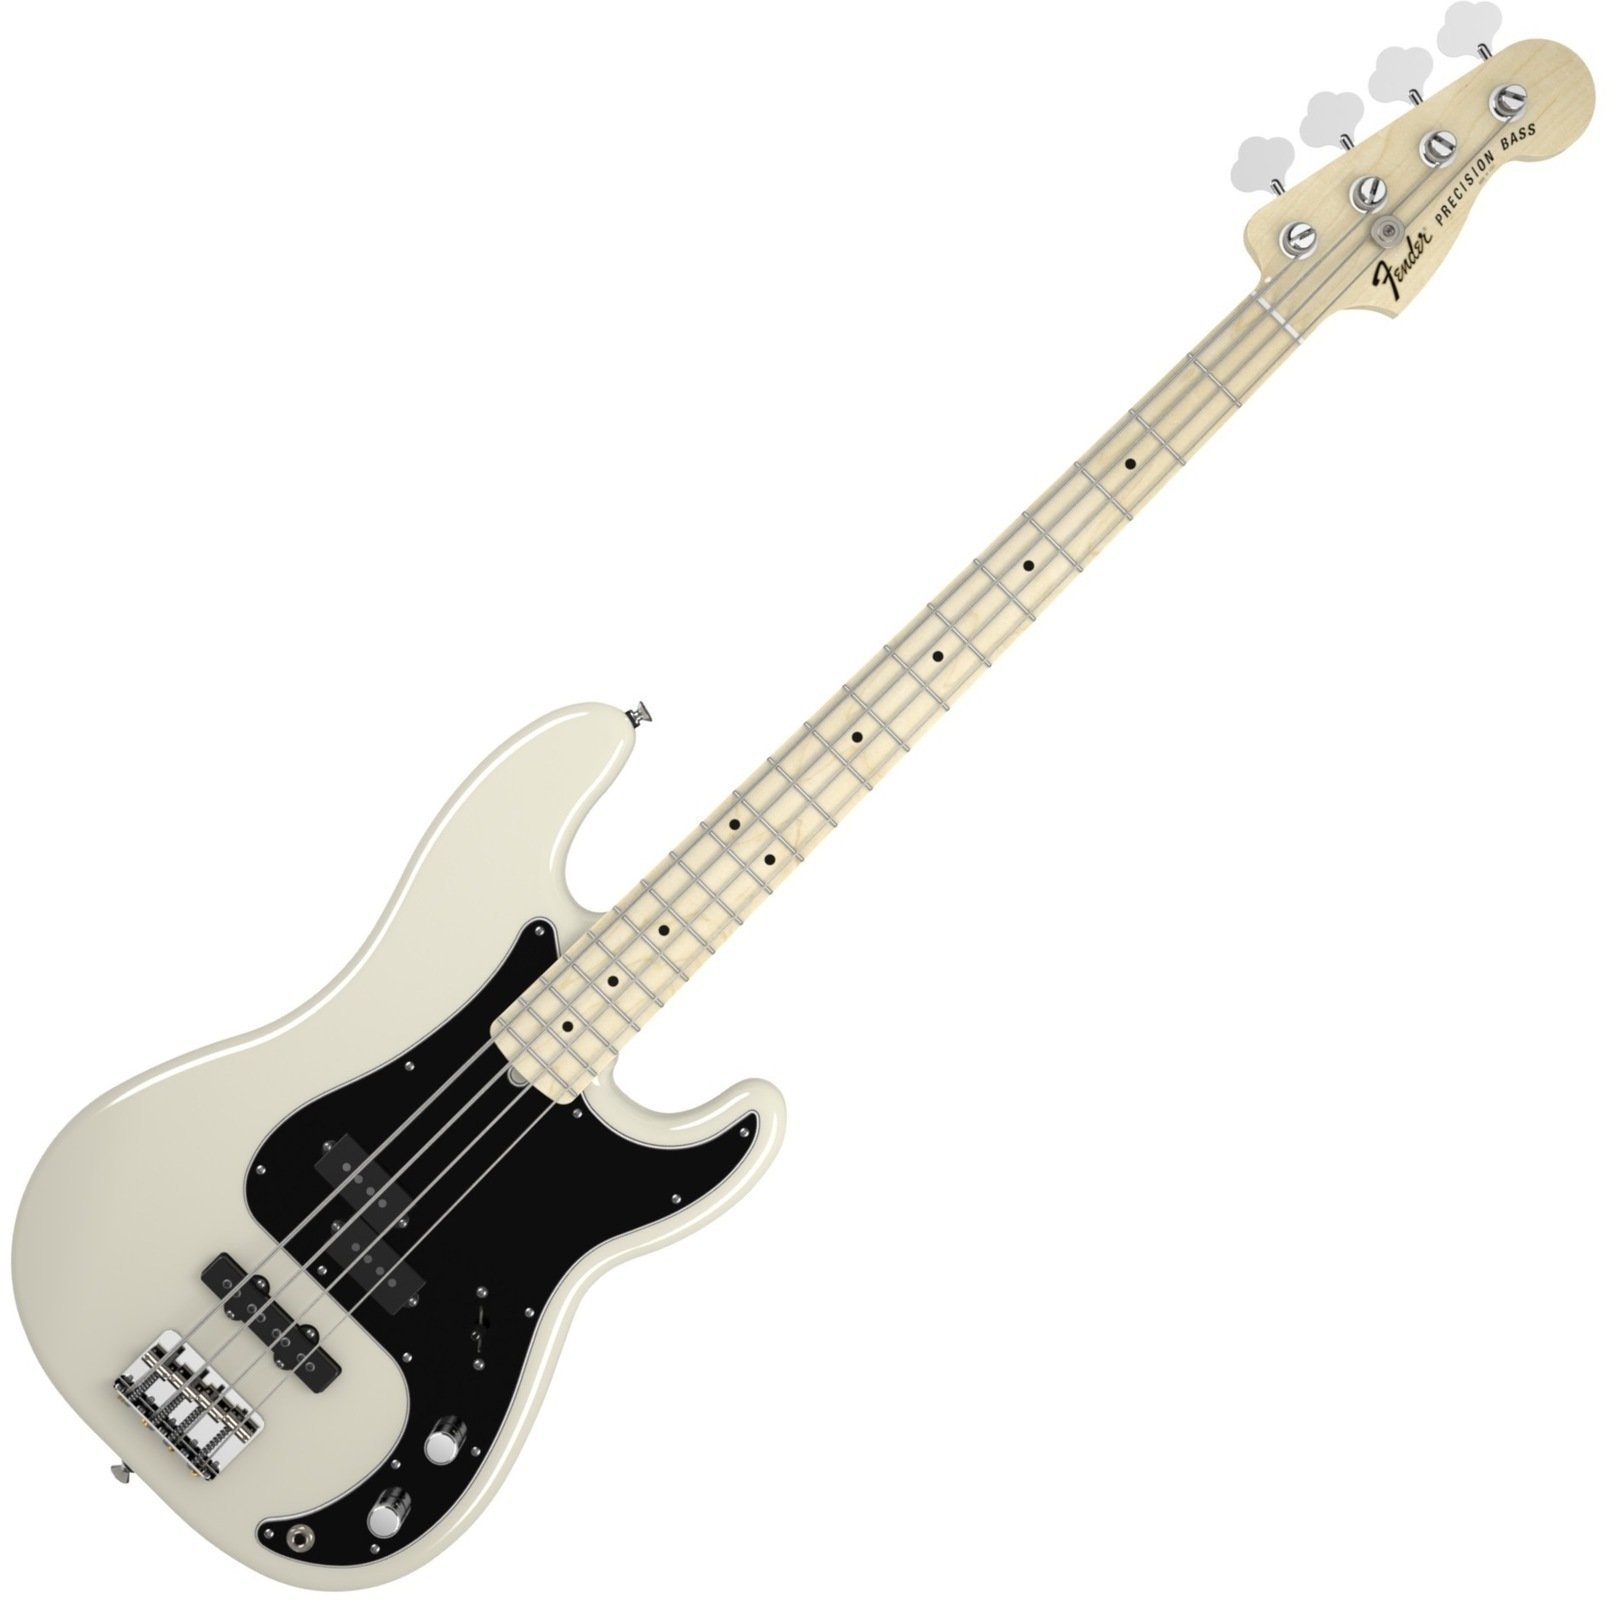 E-Bass Fender Tony Franklin Fretted Precision Bass Maple Fingerboard, Olympic White